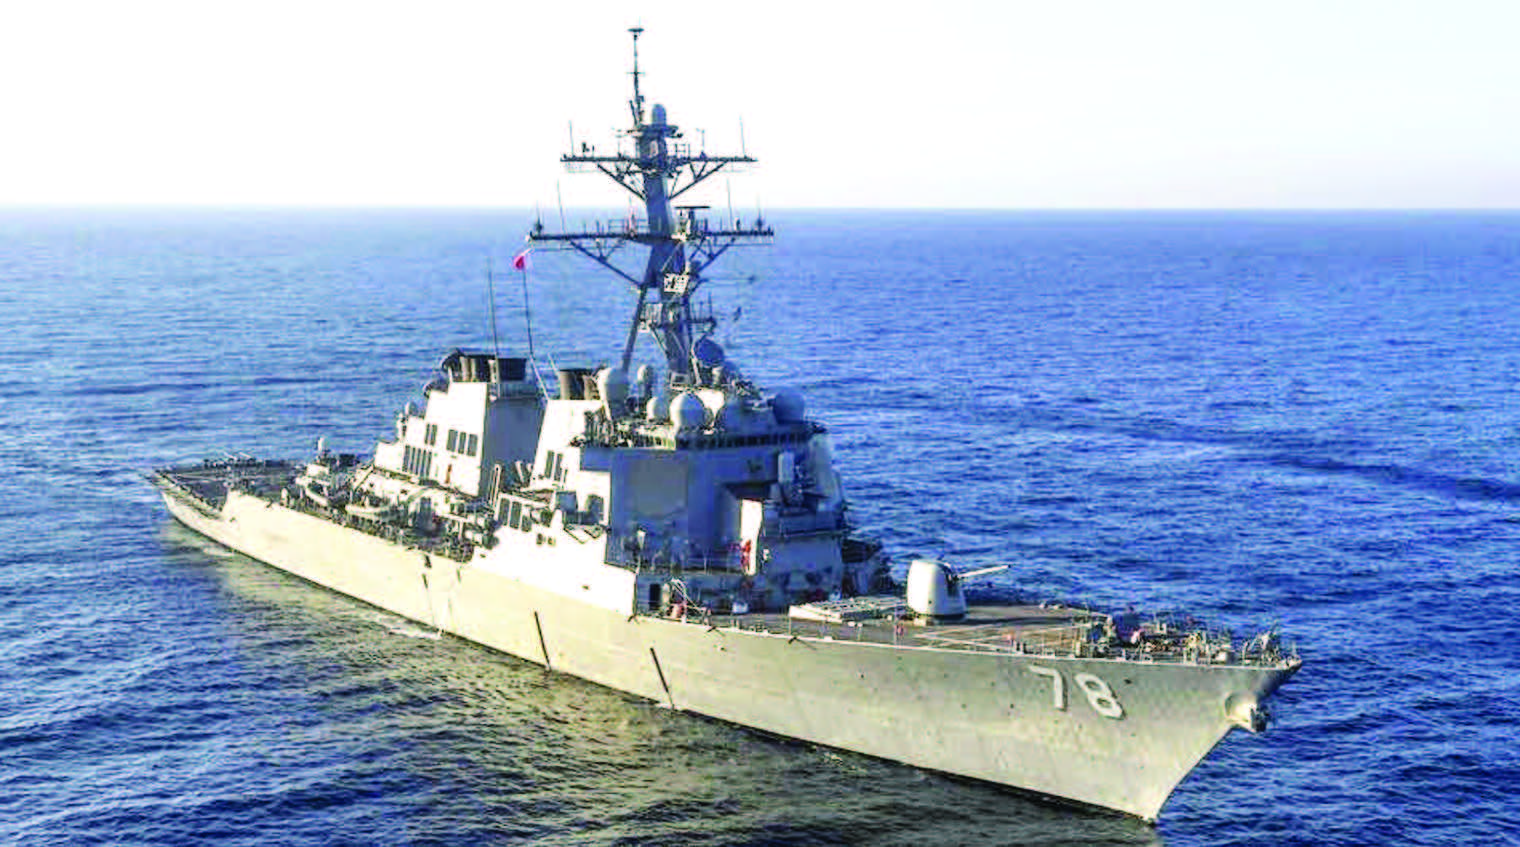 The guided-missile destroyer USS Porter moves through the Mediterranean Sea in early March. The warship was one of two that fired Tomahawk missiles Thursday, April6 night into Syria, the first direct American assault on the Syrian government and Donald Trump's most dramatic military order since becoming president. U.S. Navy via AP